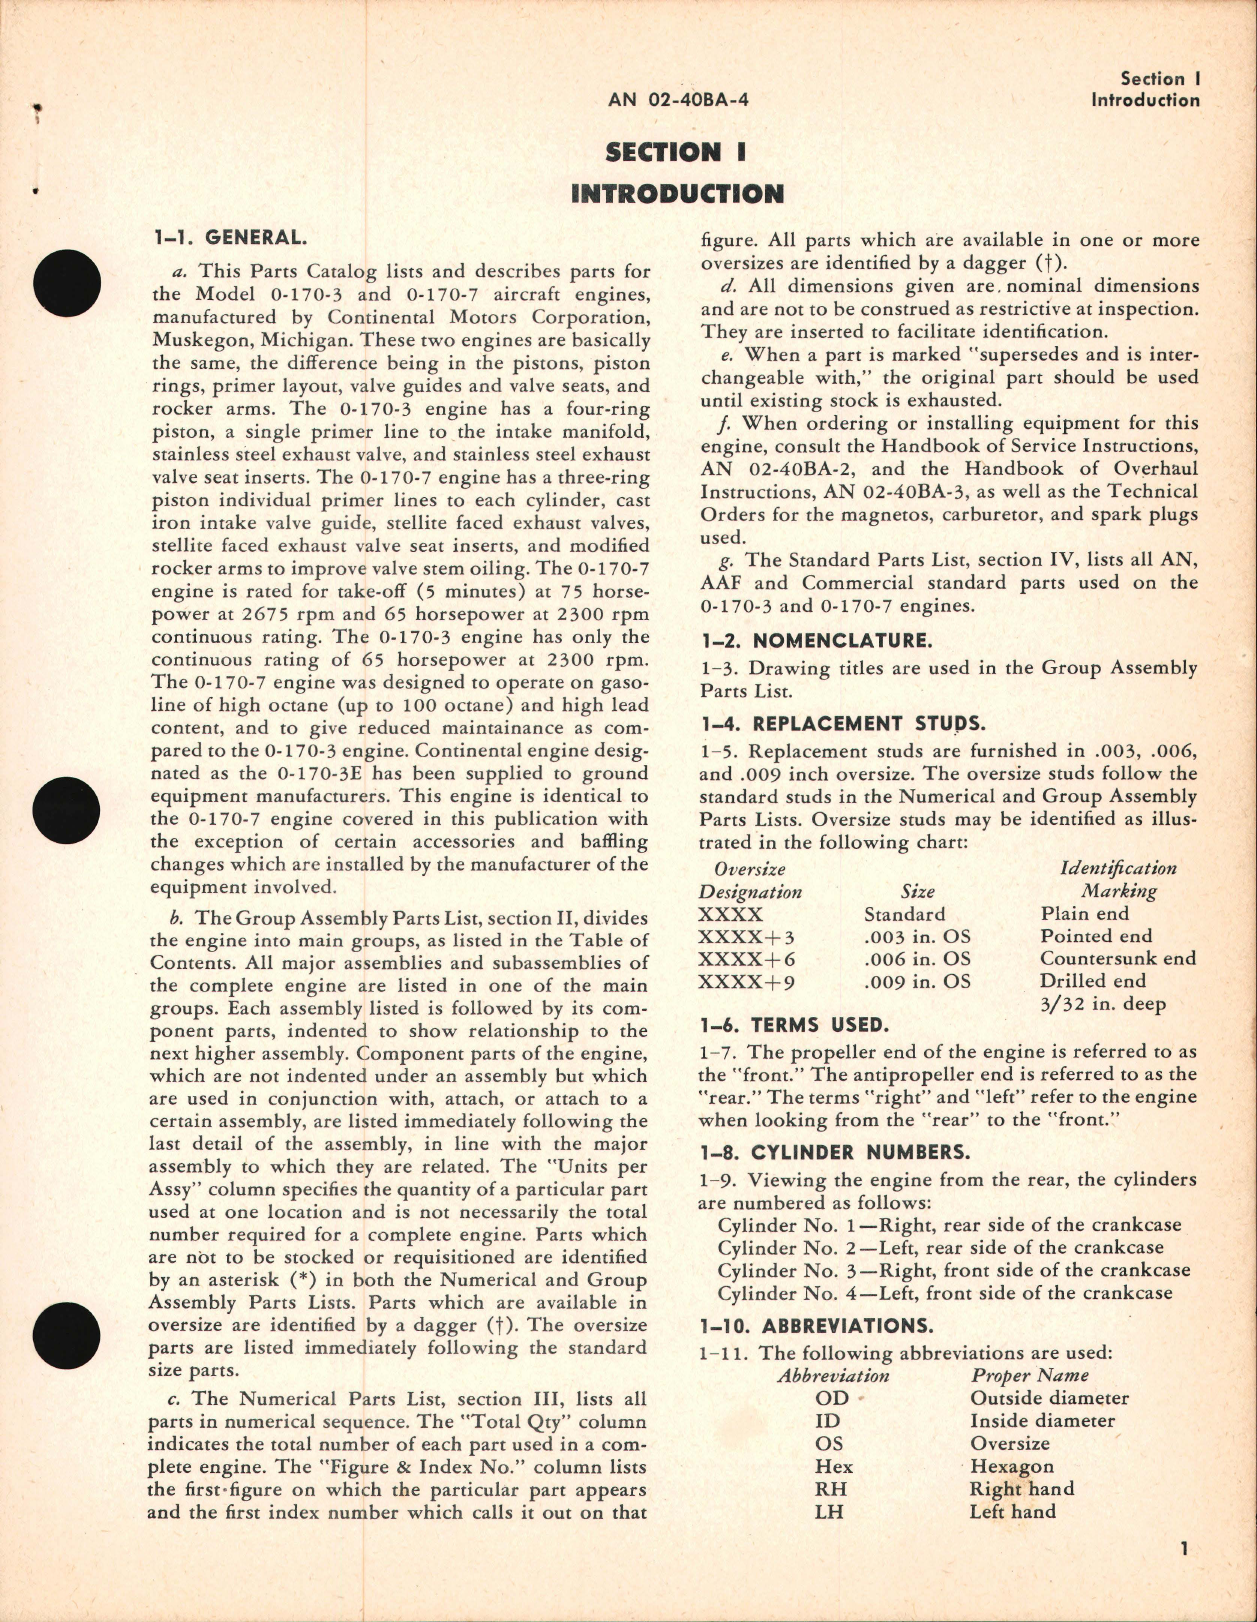 Sample page 5 from AirCorps Library document: Parts Catalog for 0-170-3 and 0-170-7 Engines